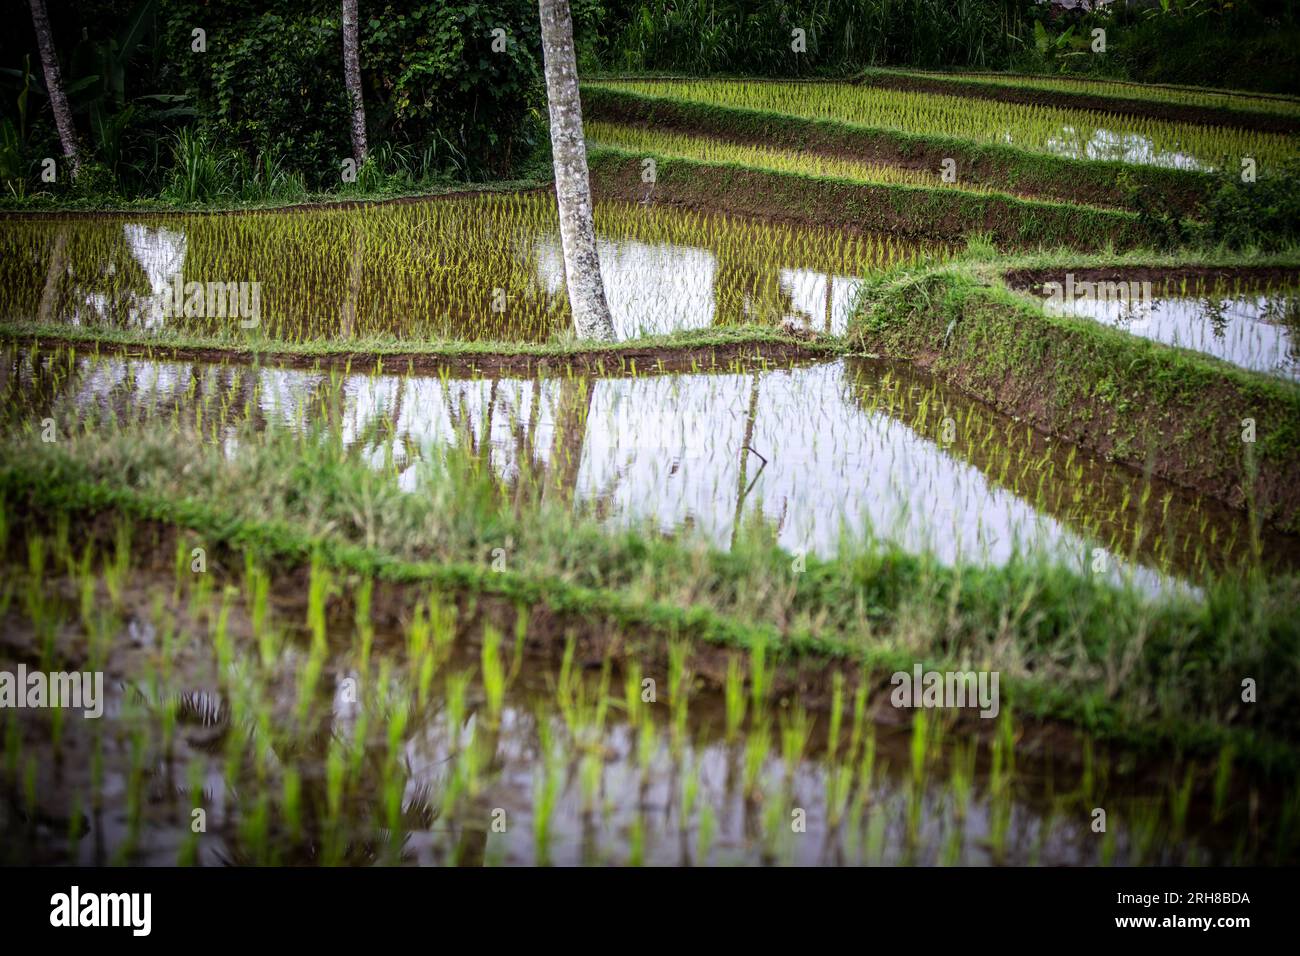 A growing Rice Patty Field in Bali, Indonesia Stock Photo - Alamy